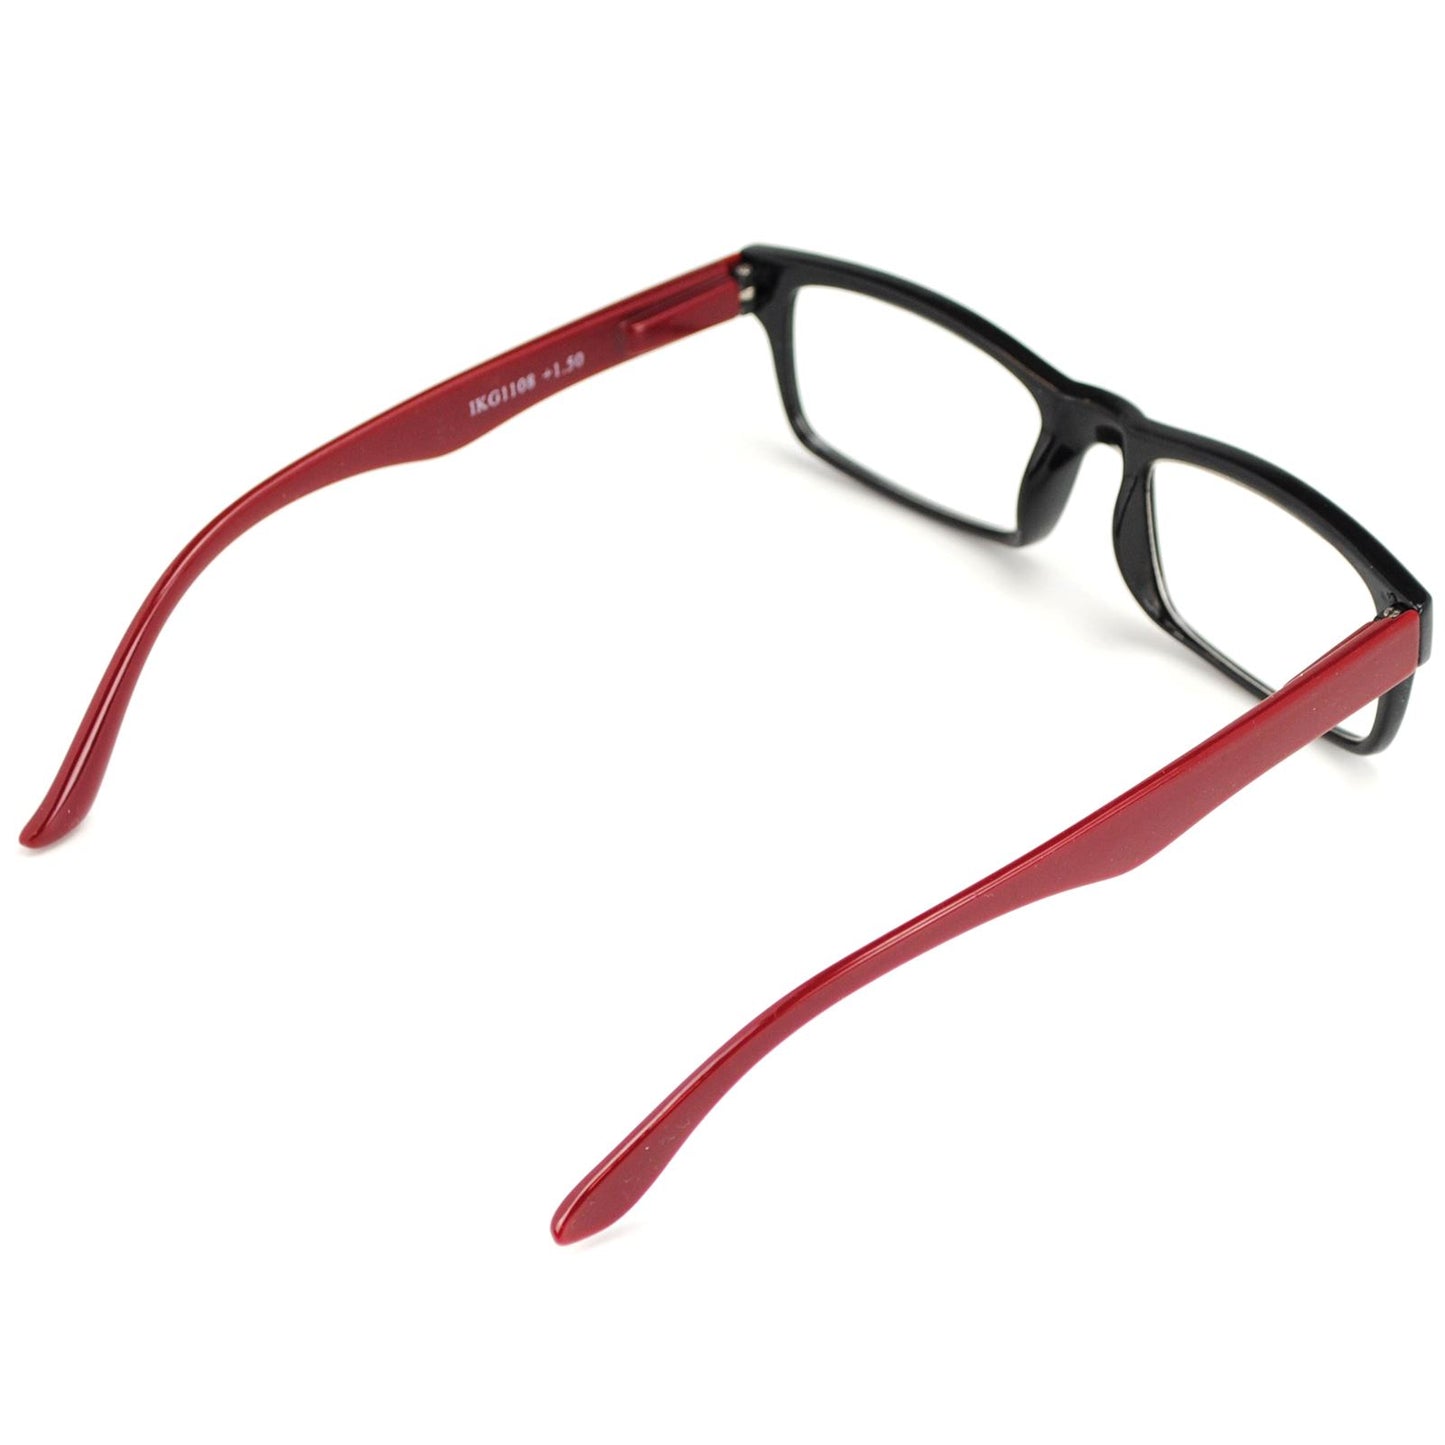 See Clearly with Reading Glasses